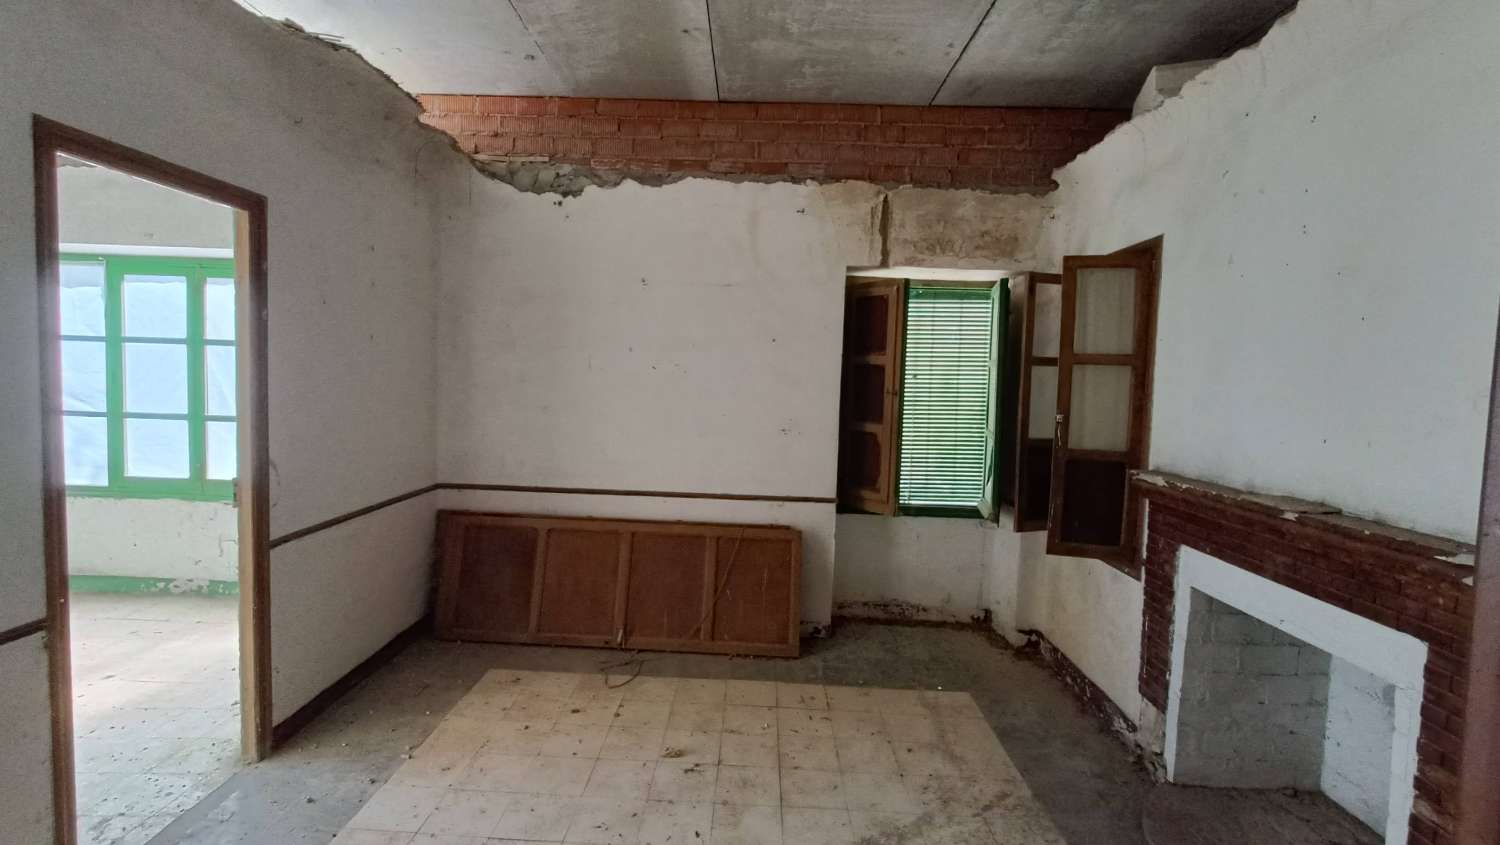 Large country house for renovation with lots of potential